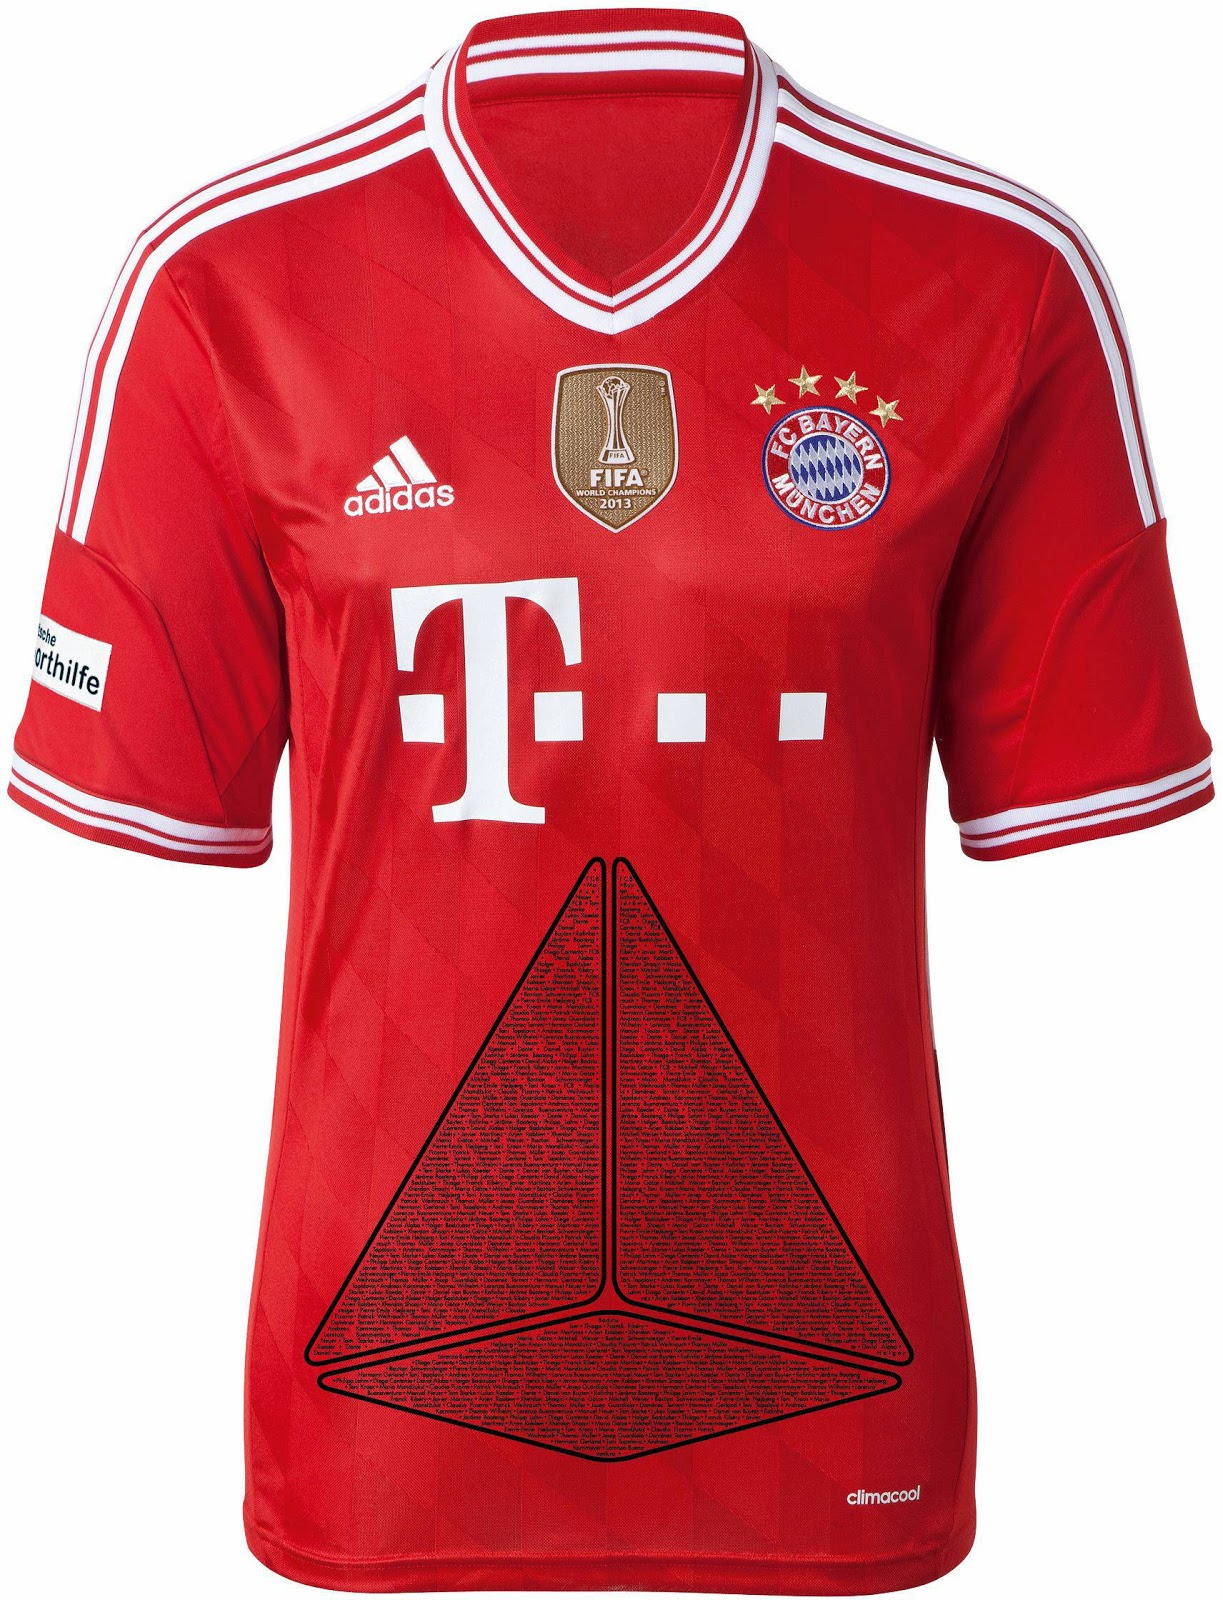 FC Bayern München Special Home Kit Feature Fans Names ...